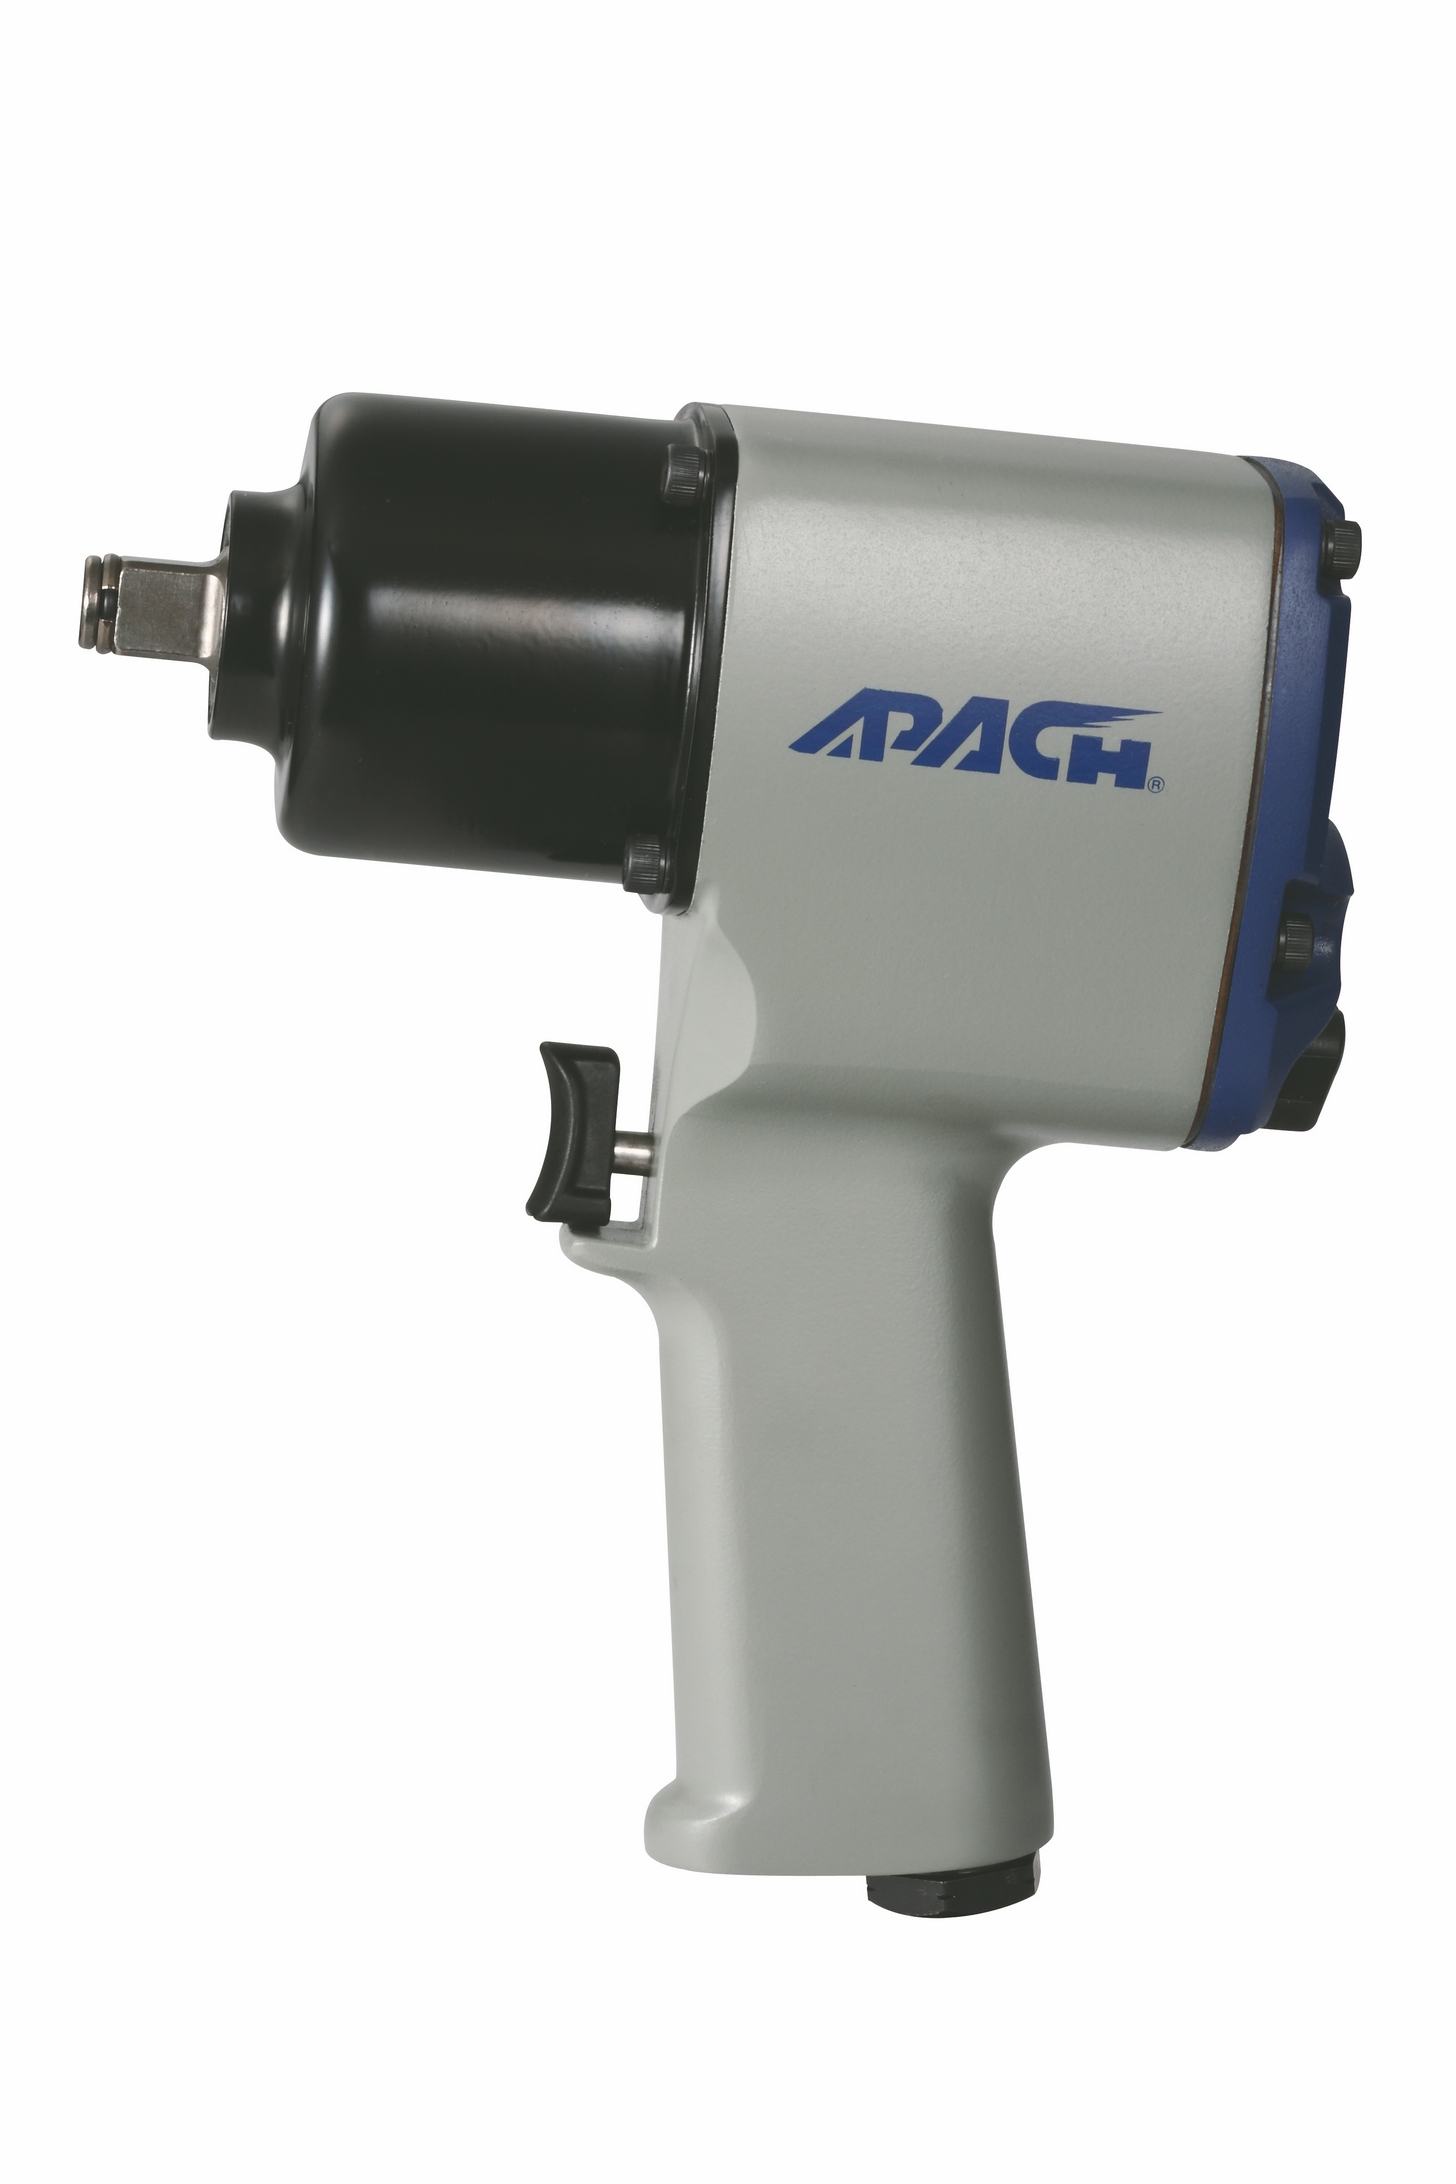 AW070 1／2" Air Impact Wrench